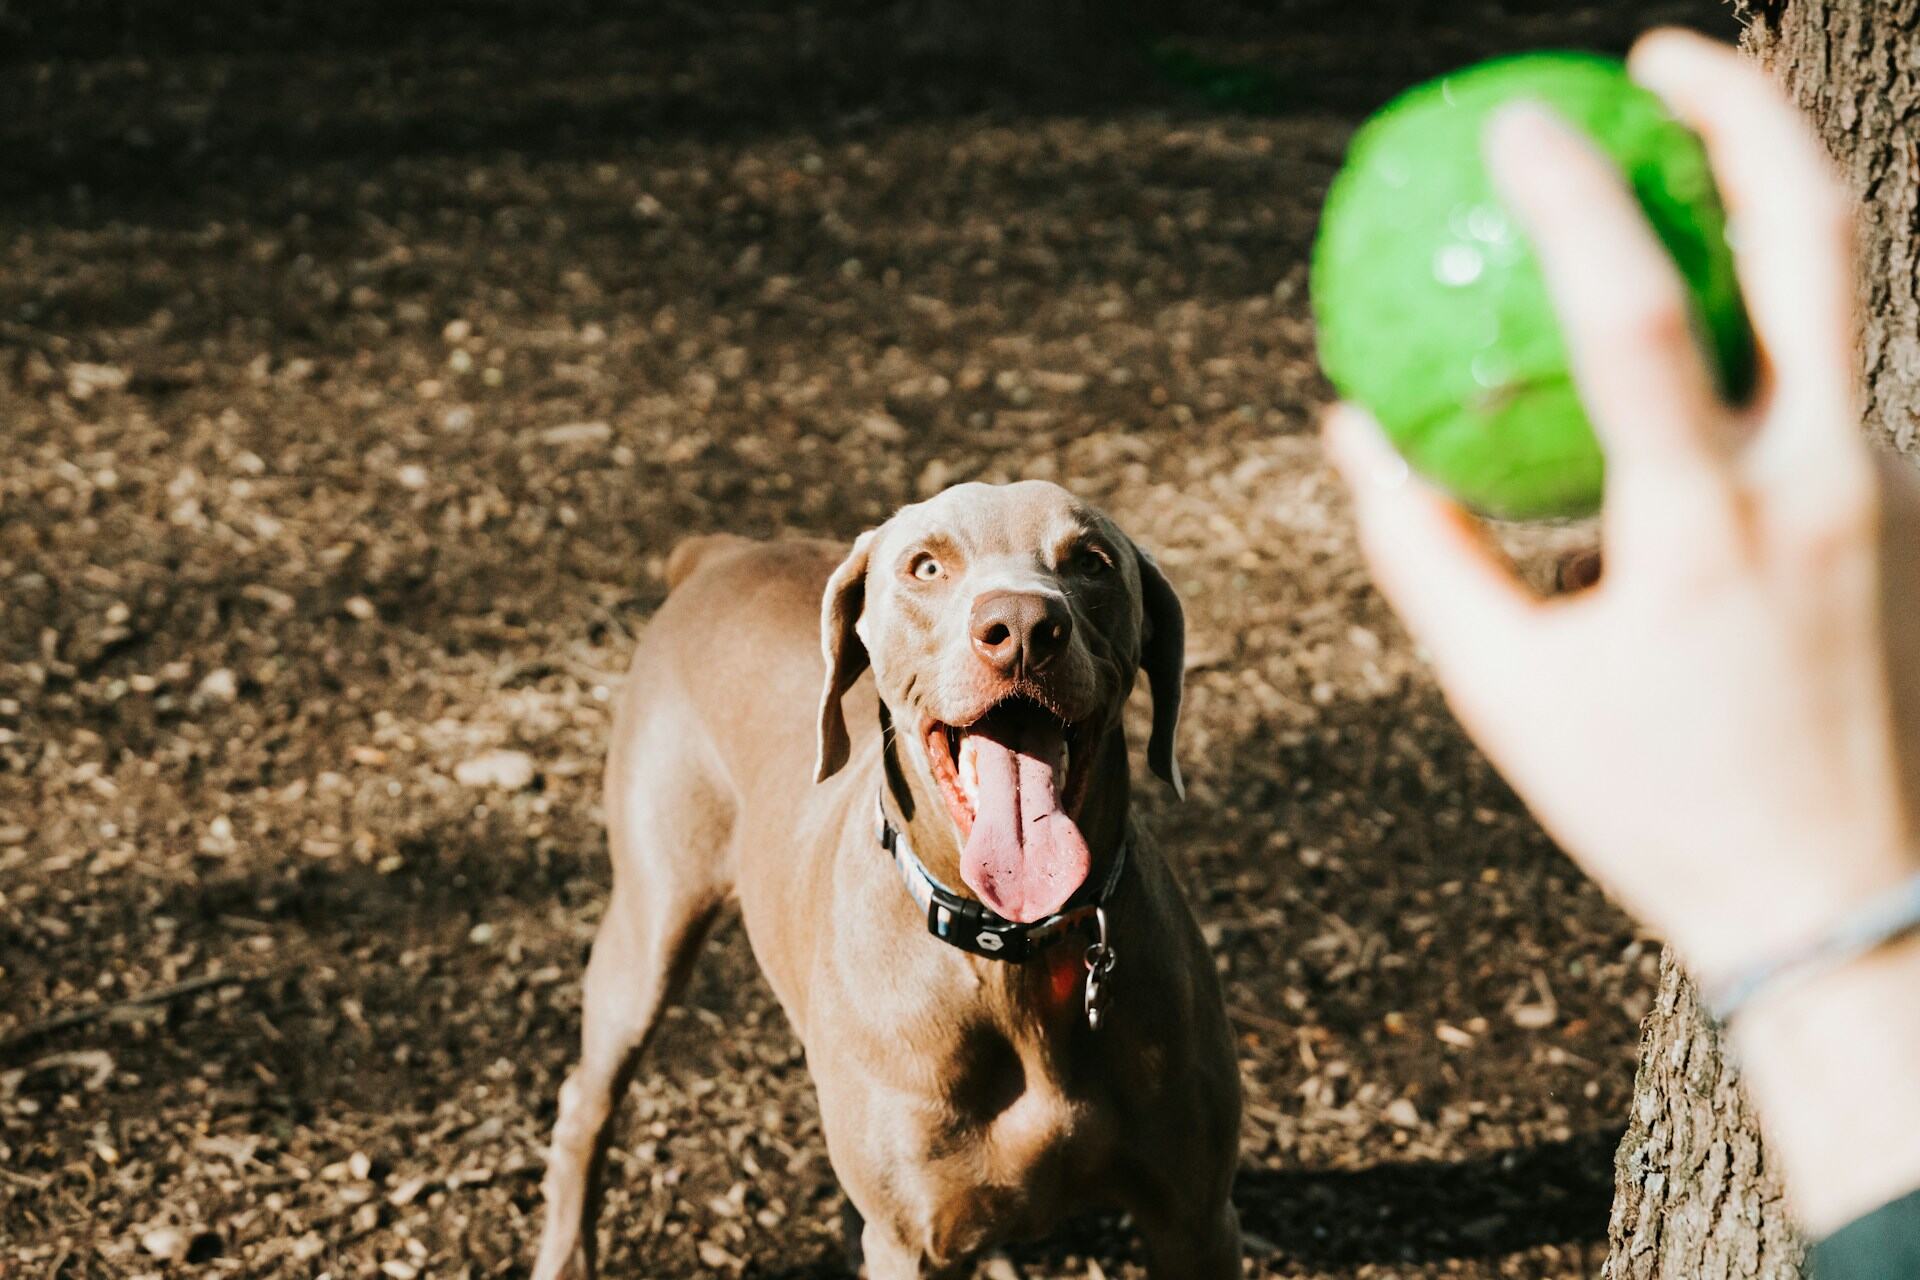 A dog reaching out for a green ball in a park